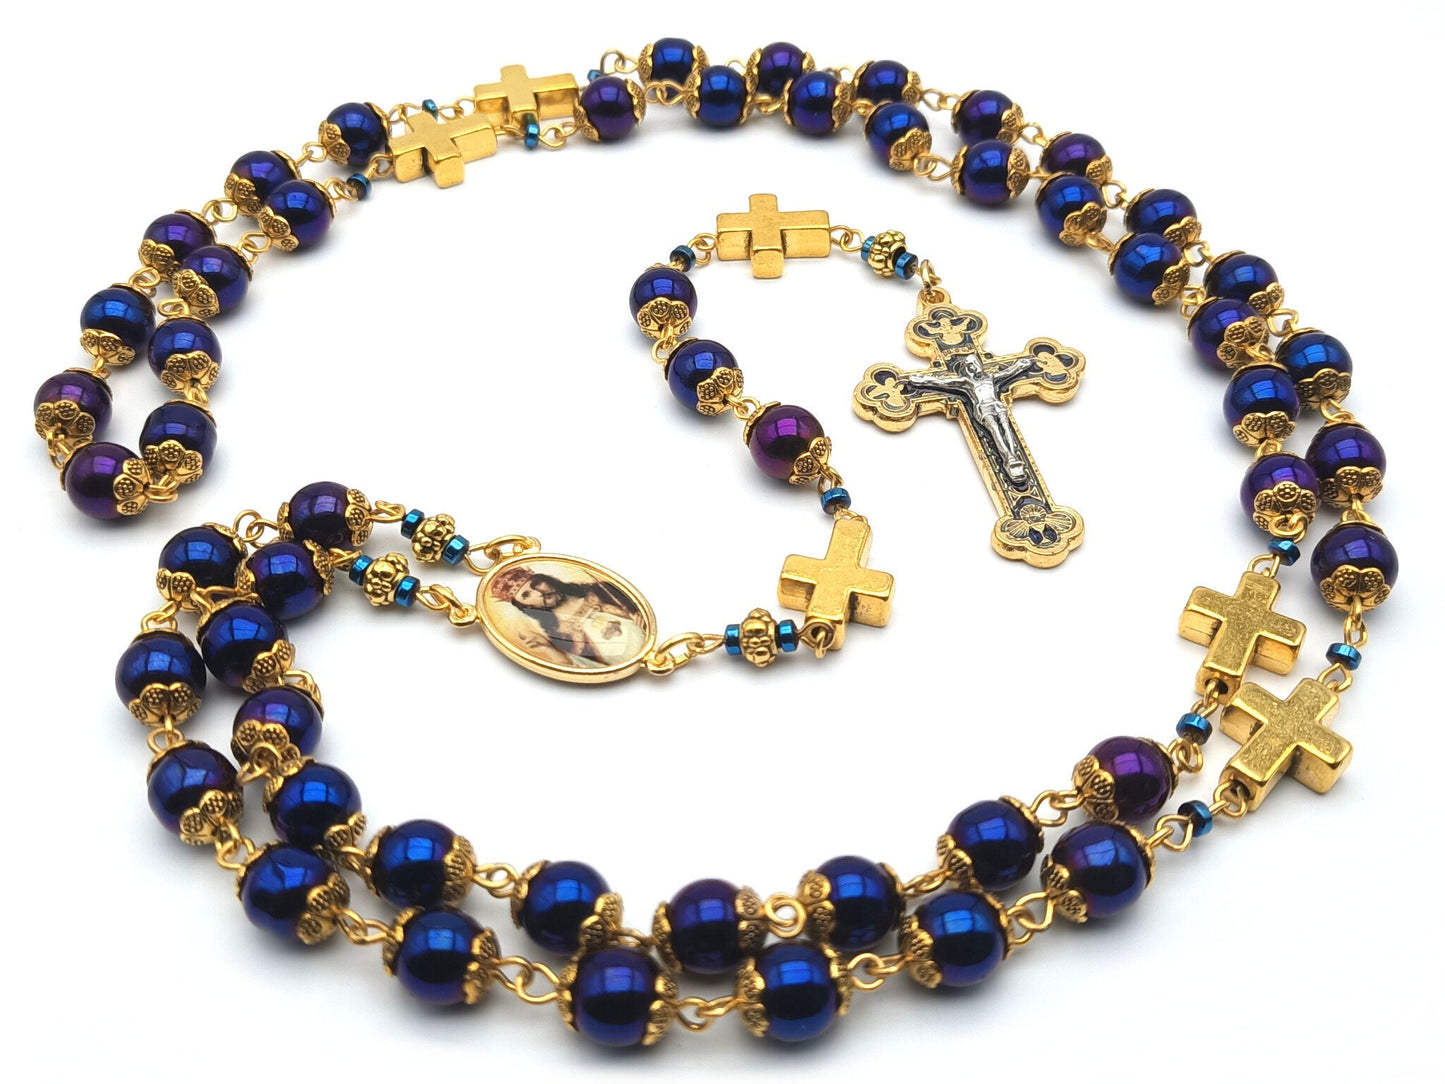 Christ the King unique rosary beads with blue hematite beads, golden cross pater beads, blue and gold crucifix and picture centre medal.